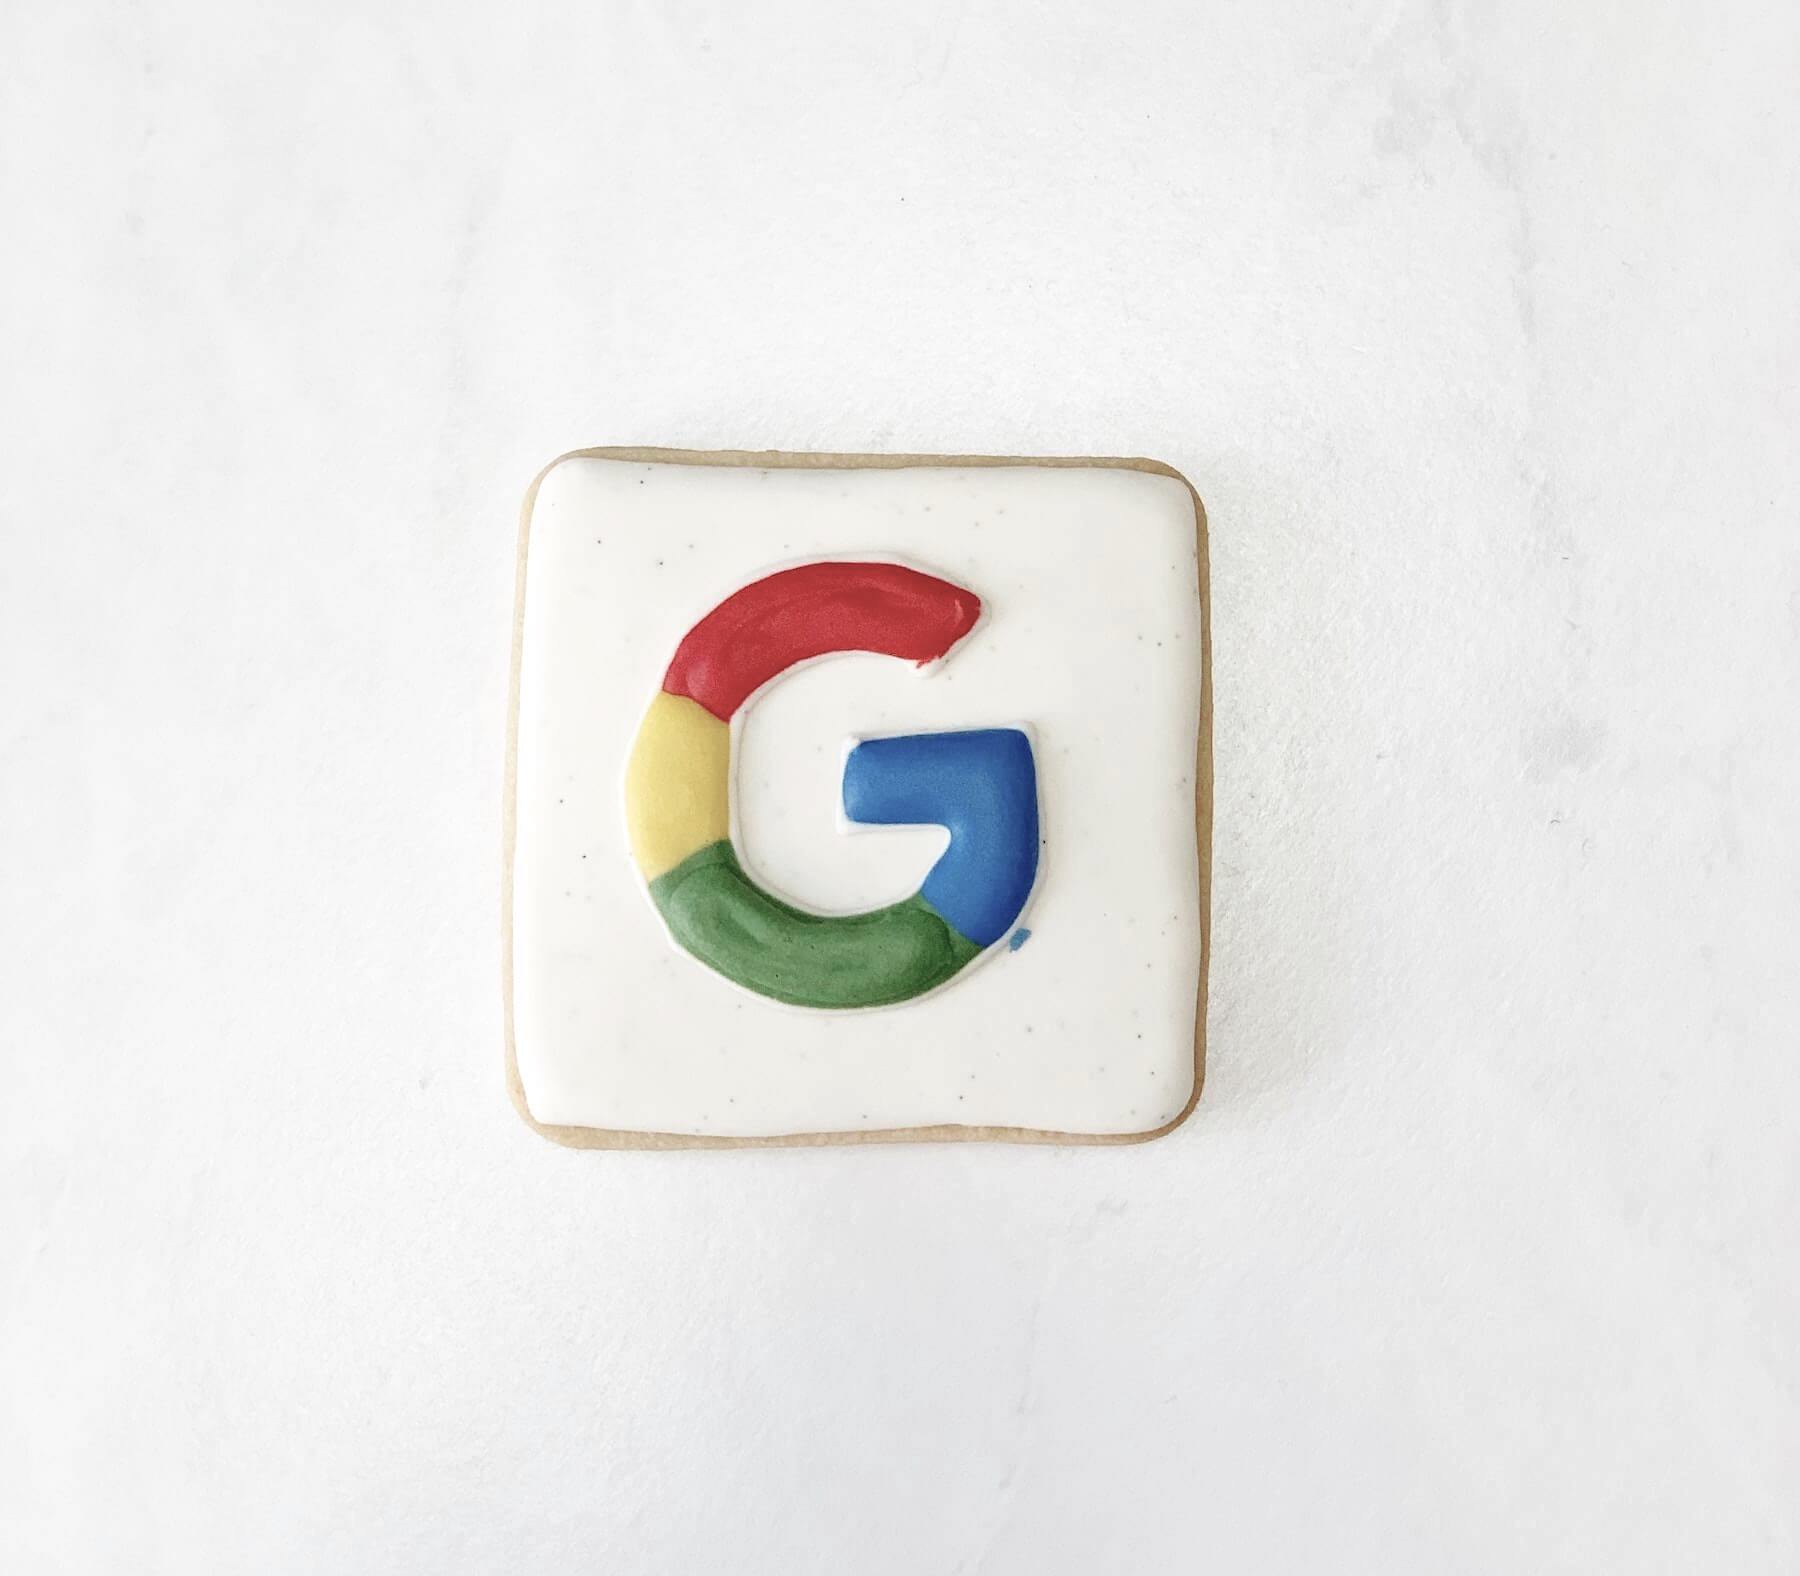 A cookie decorated with the Google logo on a white background, crafted by Elliot Olson at Studio Anansi in Portland, Oregon.